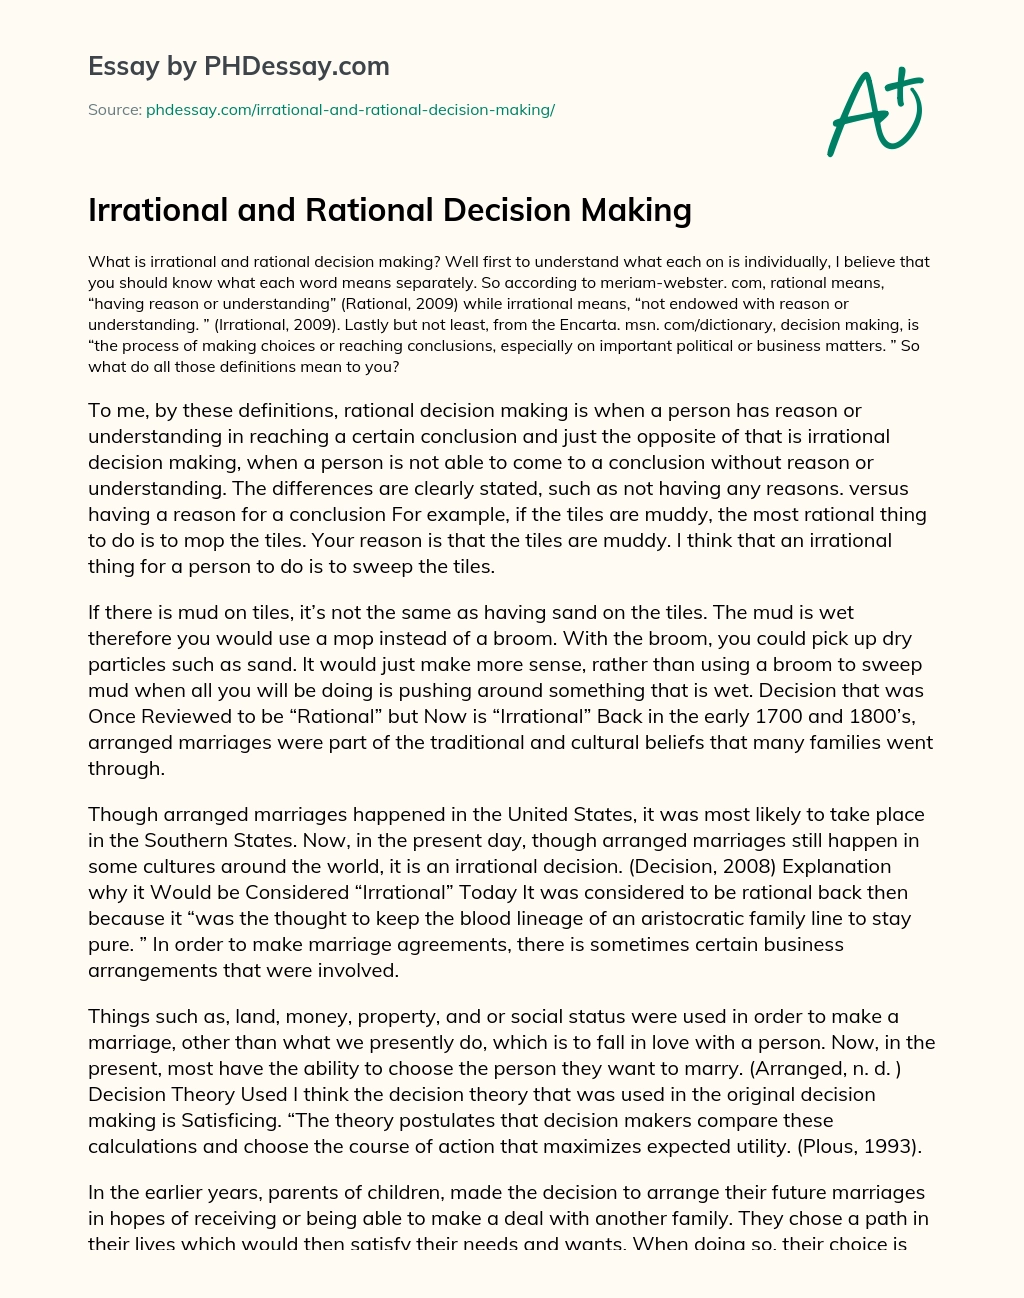 Irrational and Rational Decision Making essay